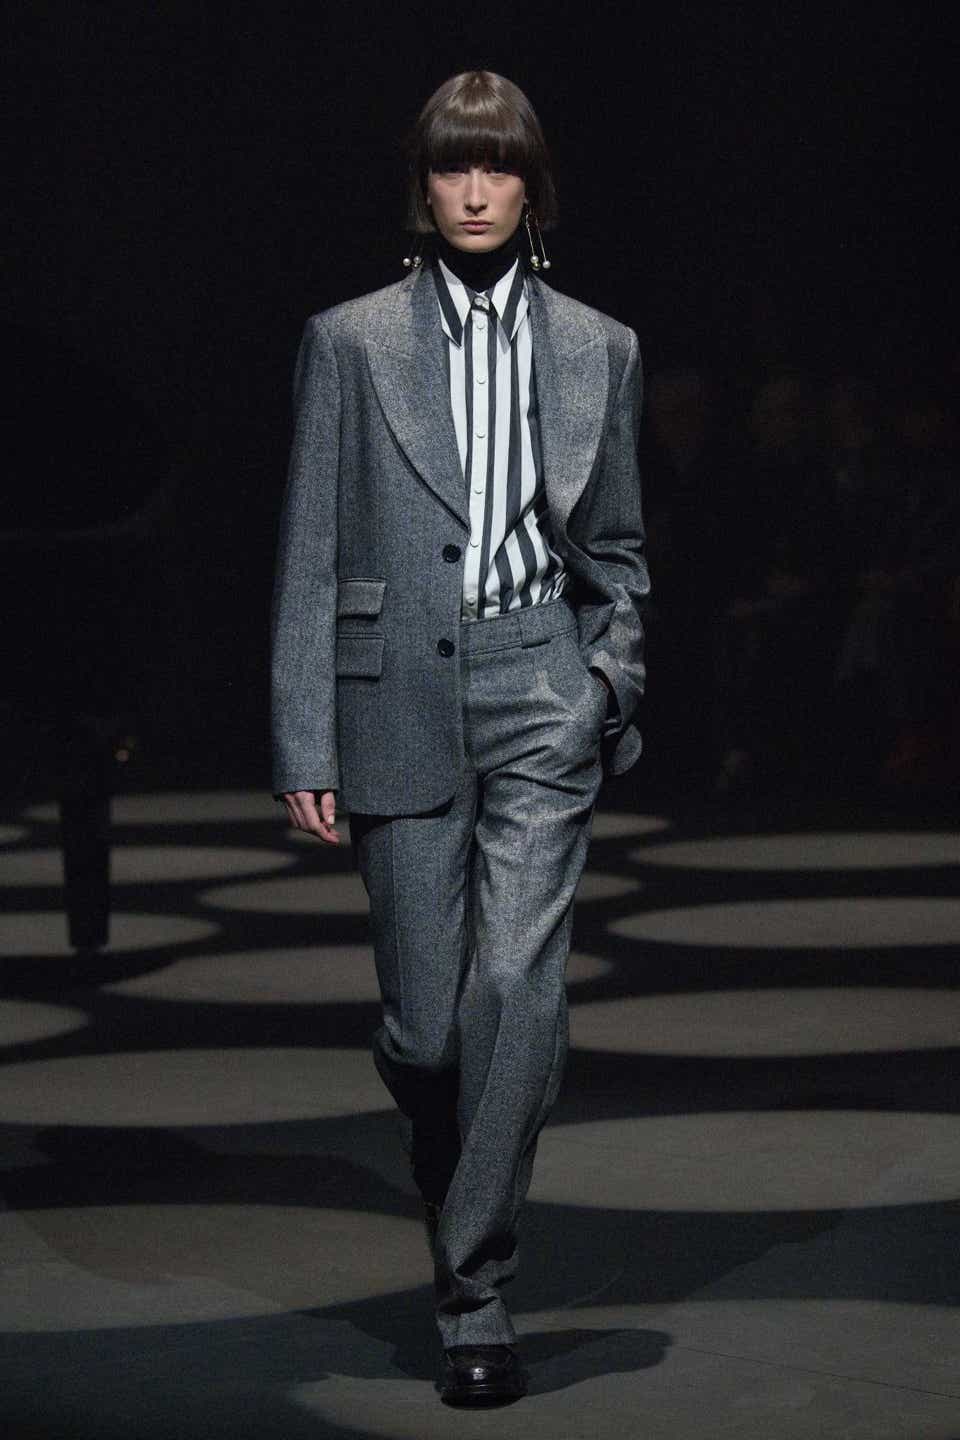 A model wearing a gray suit with a striped shirt on the Erdem Fall 2022 runway show.